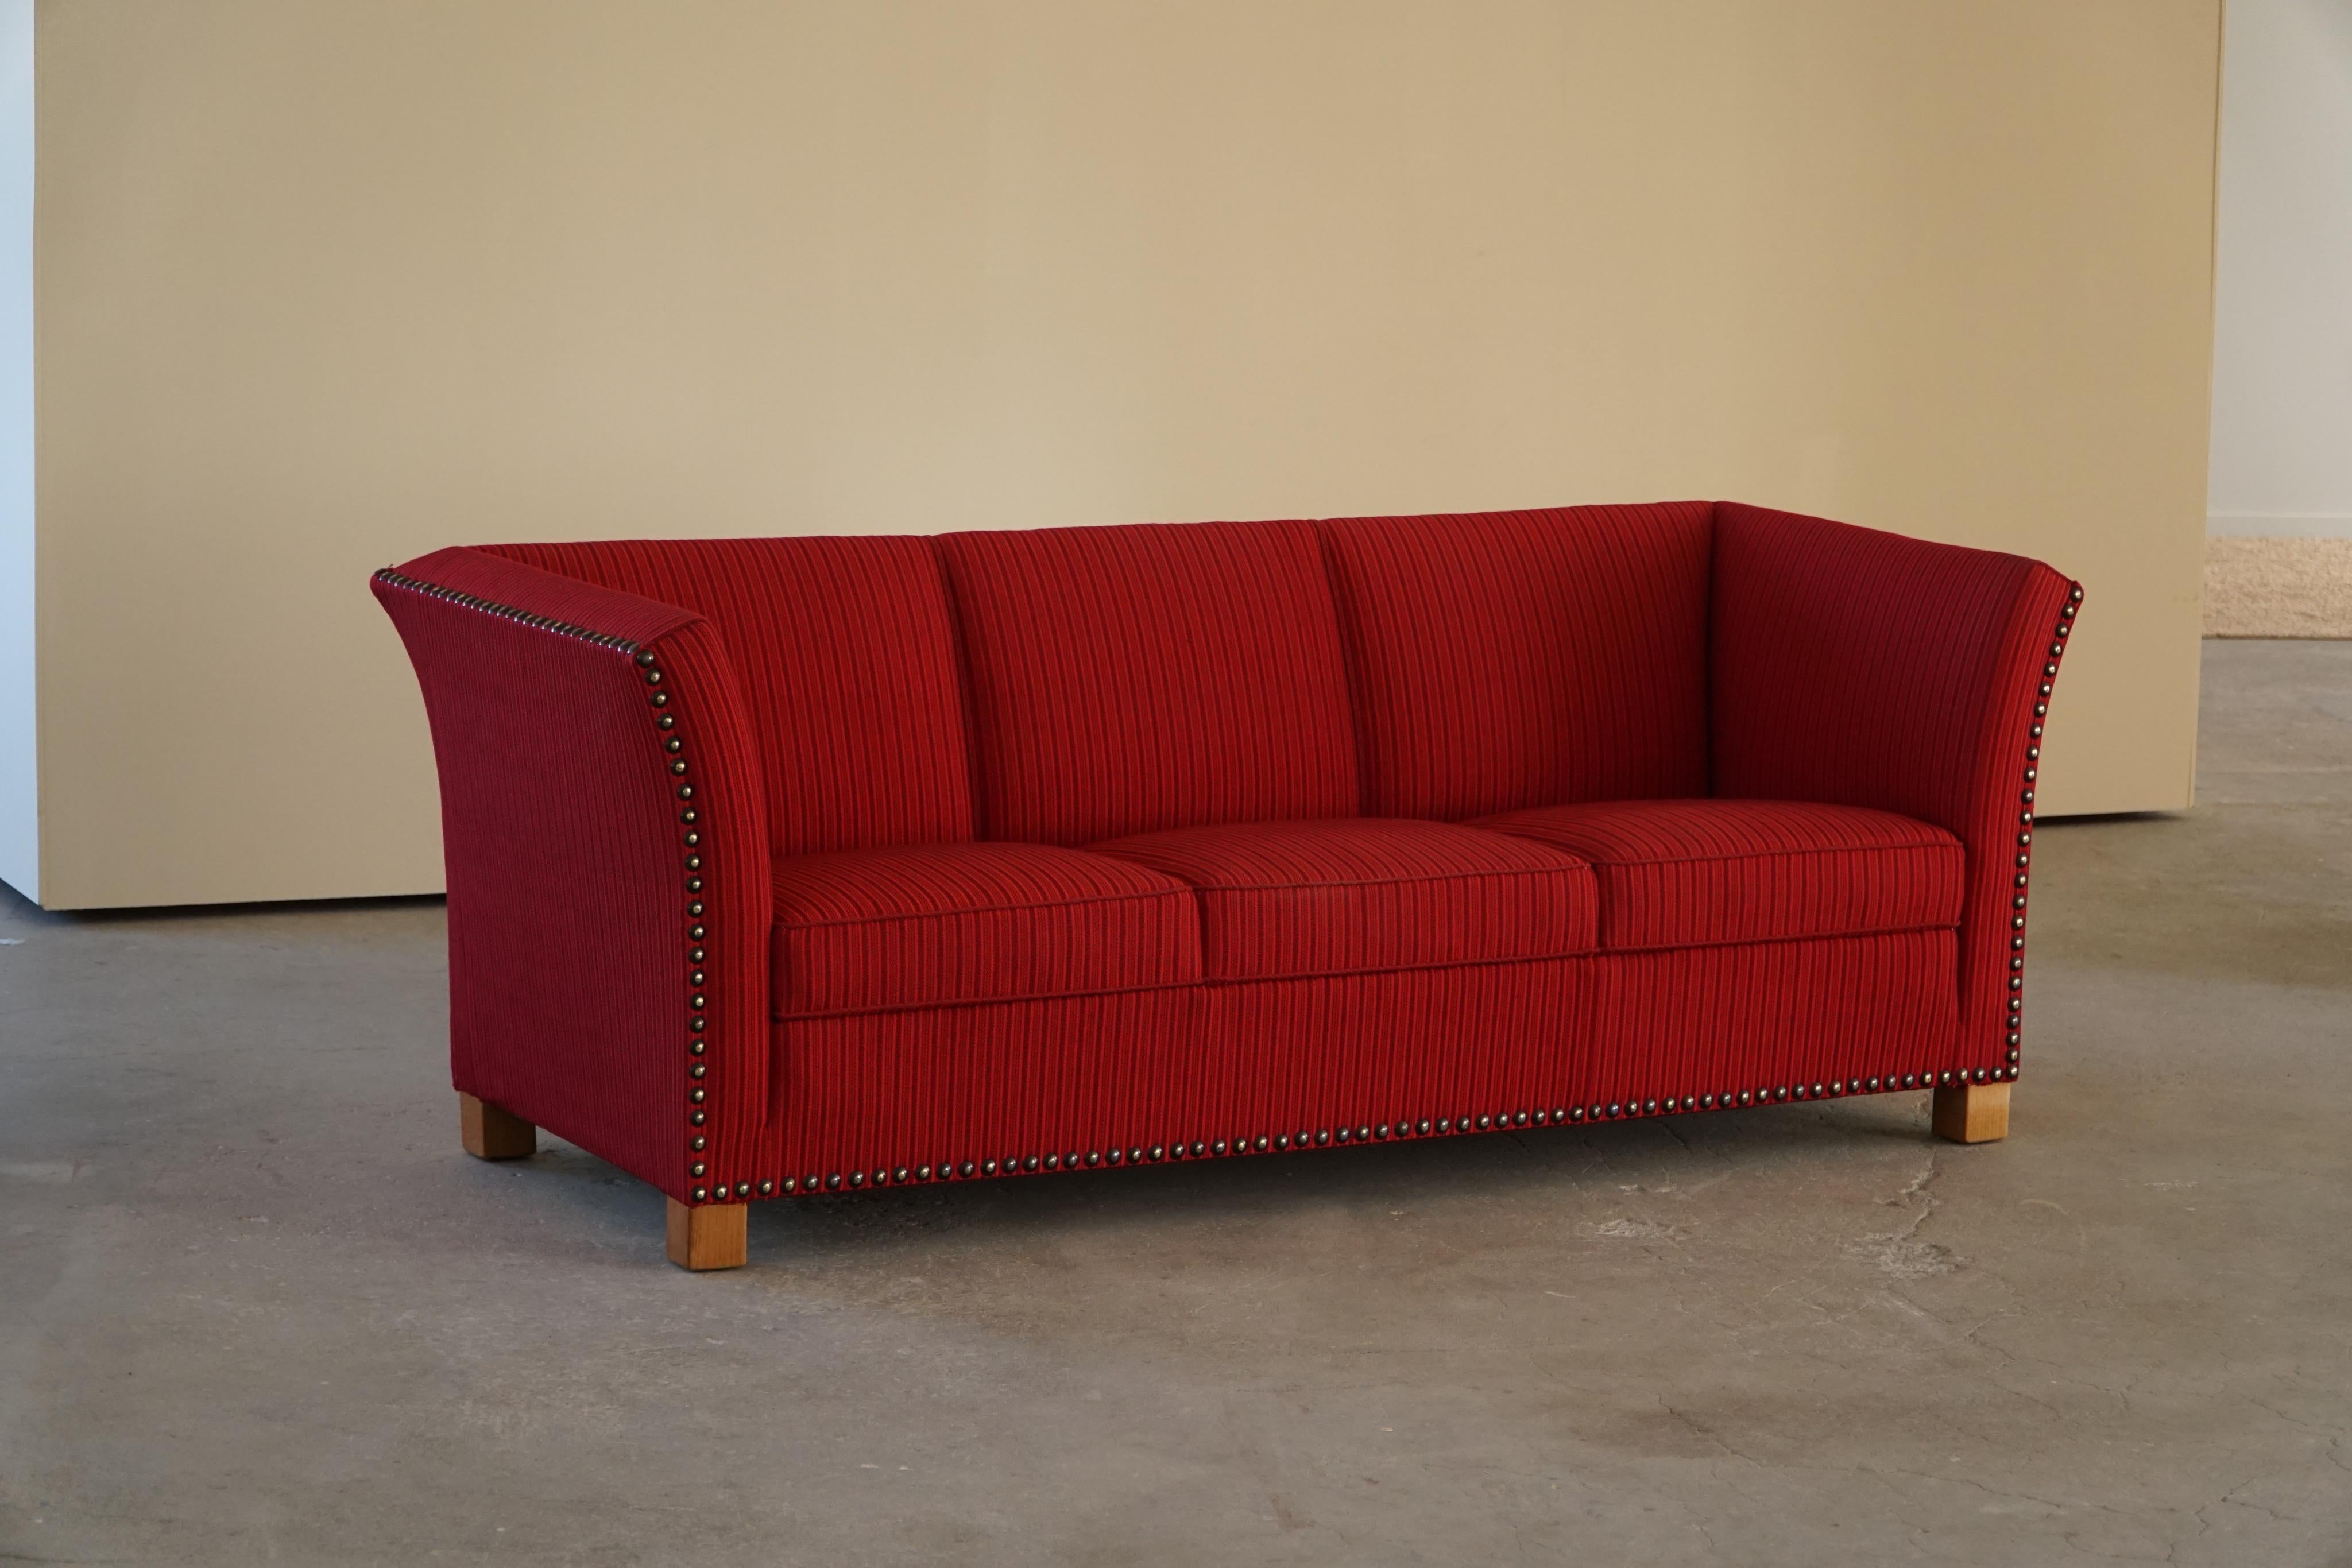 Art Deco 3-Seater Sofa By A Danish Cabinetmaker, Flemming Lassen Style, 1940s For Sale 5